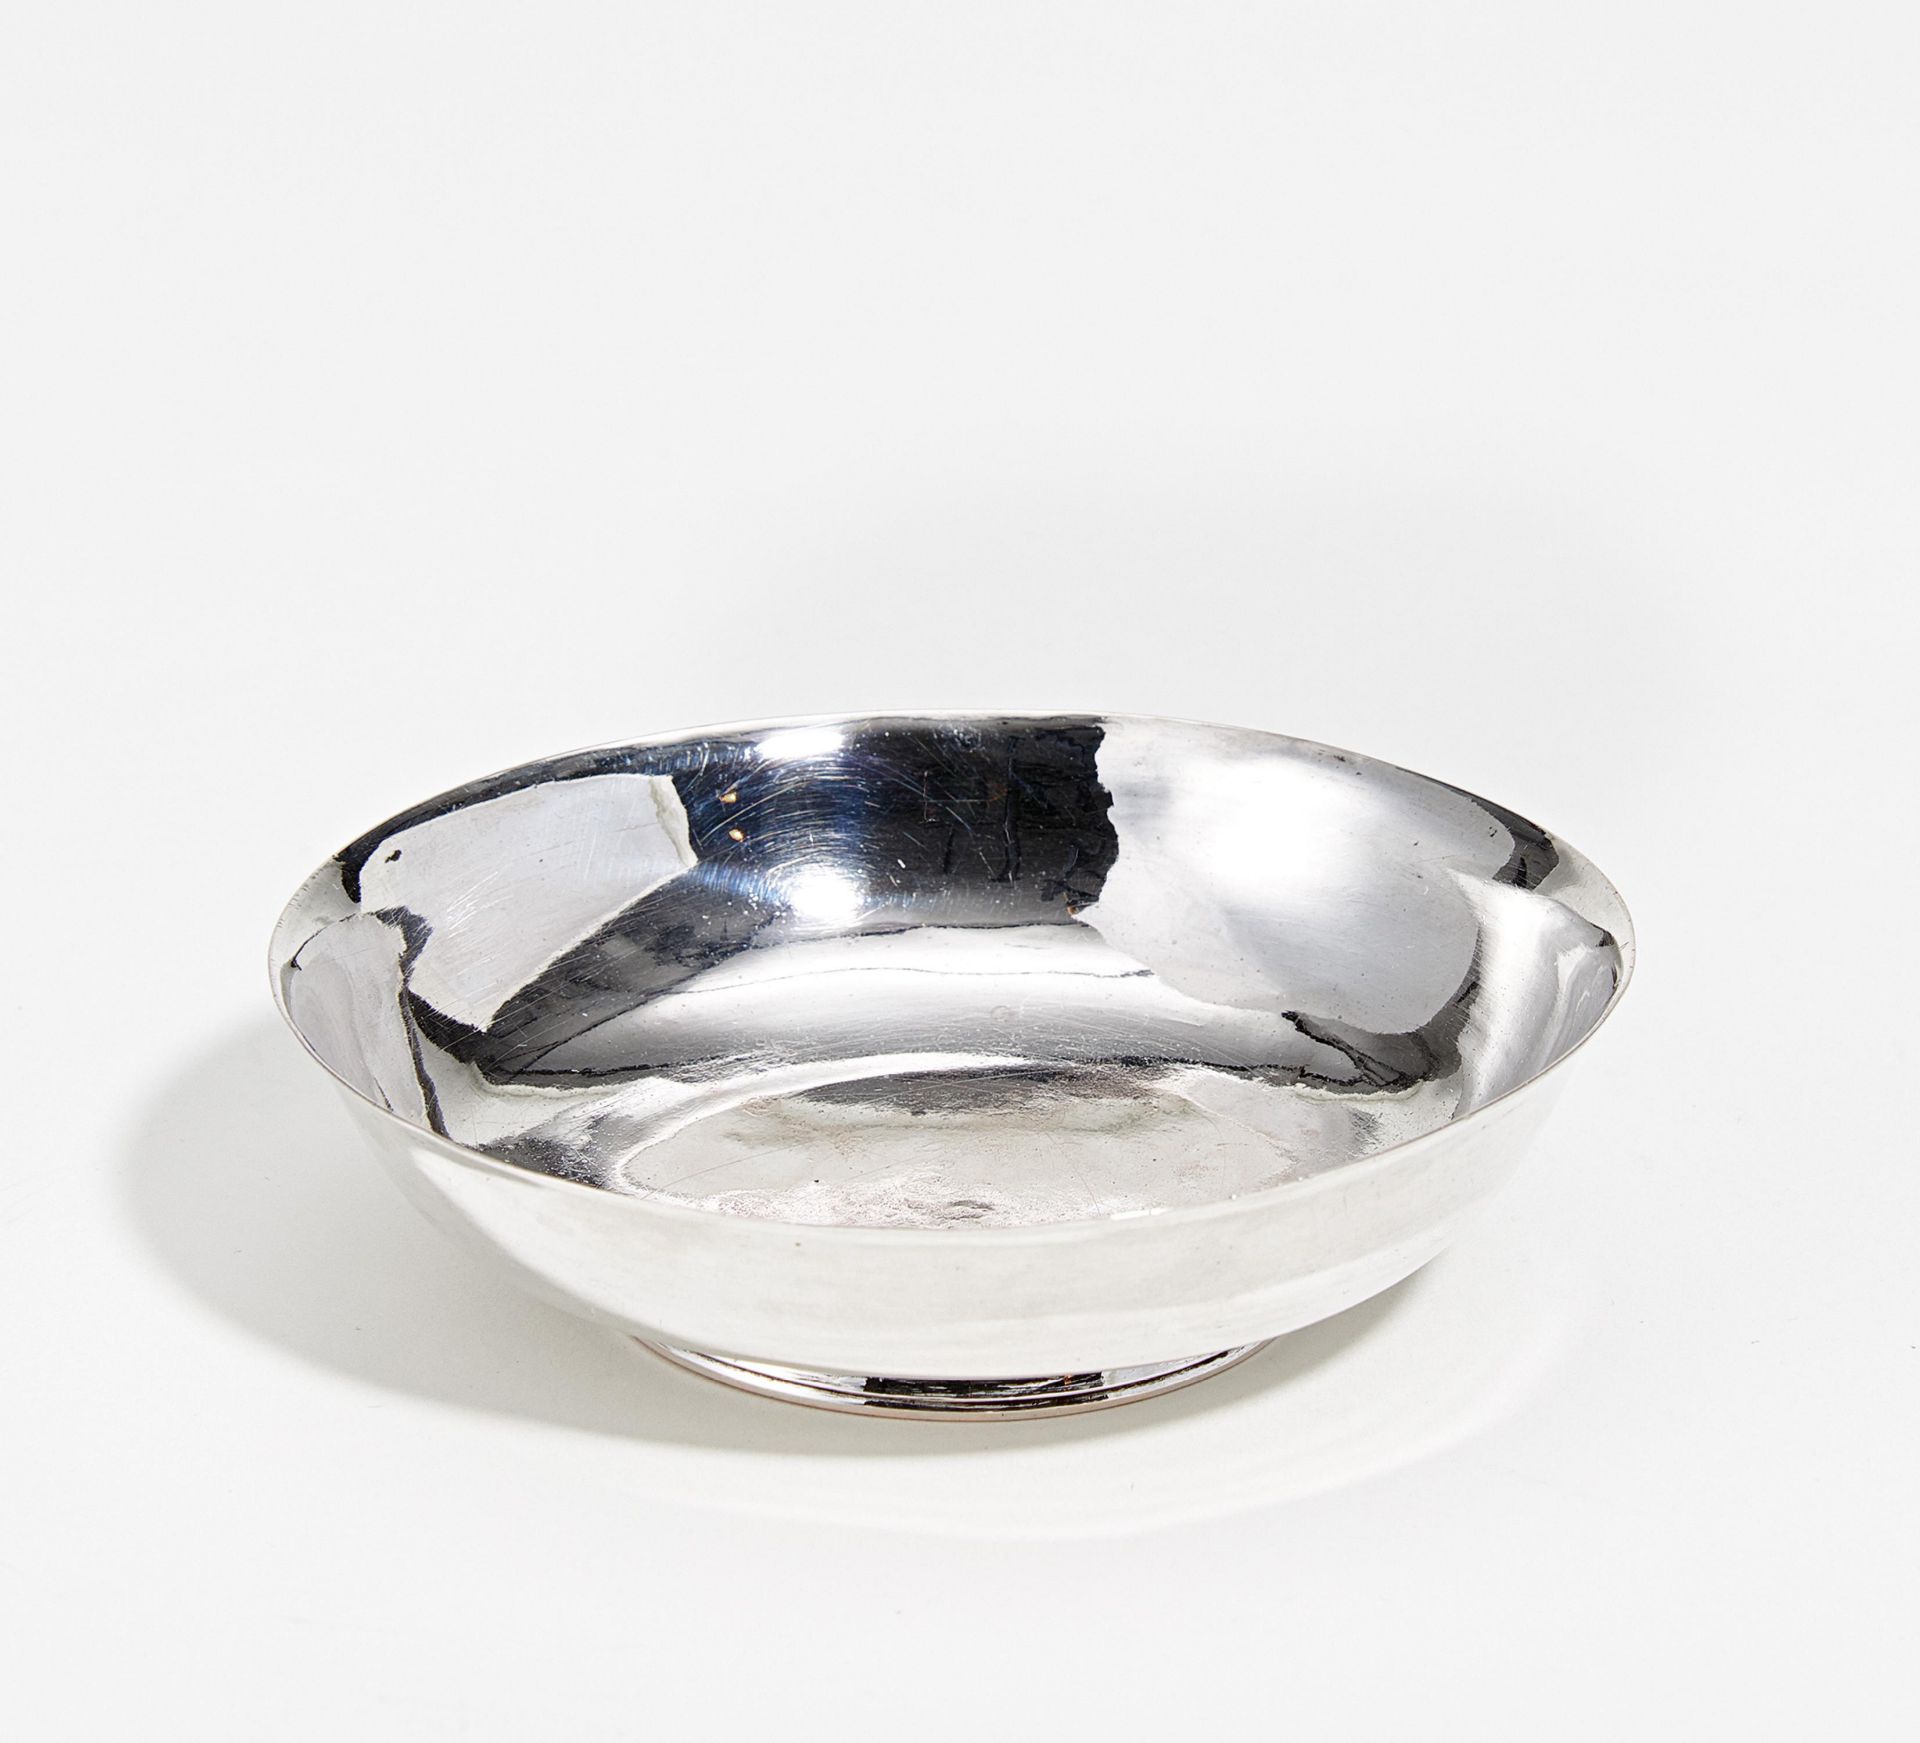 Small round silver bowl with slightly flared rim